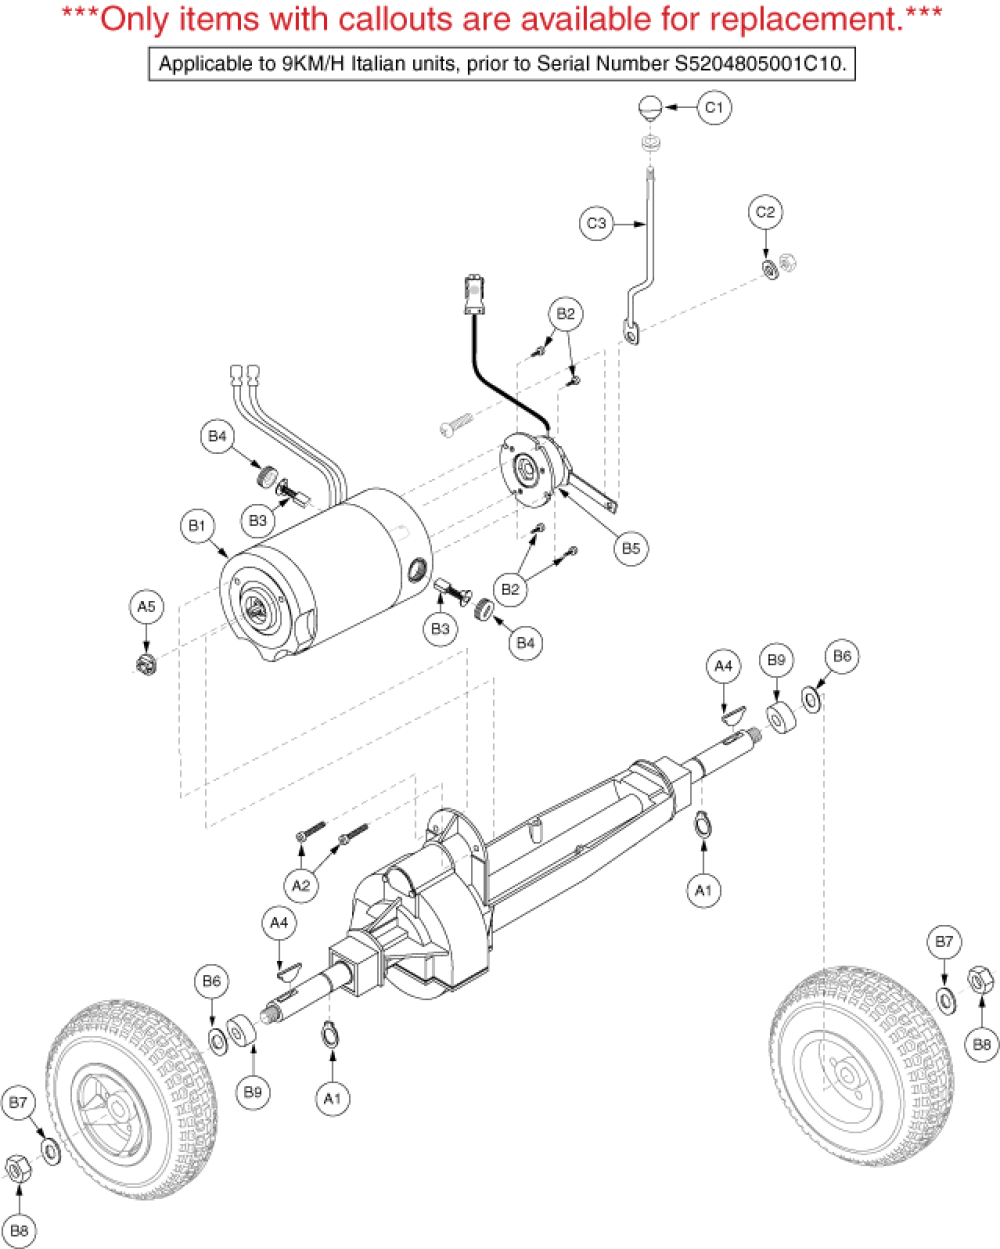 Drive Assembly - Rockwell parts diagram